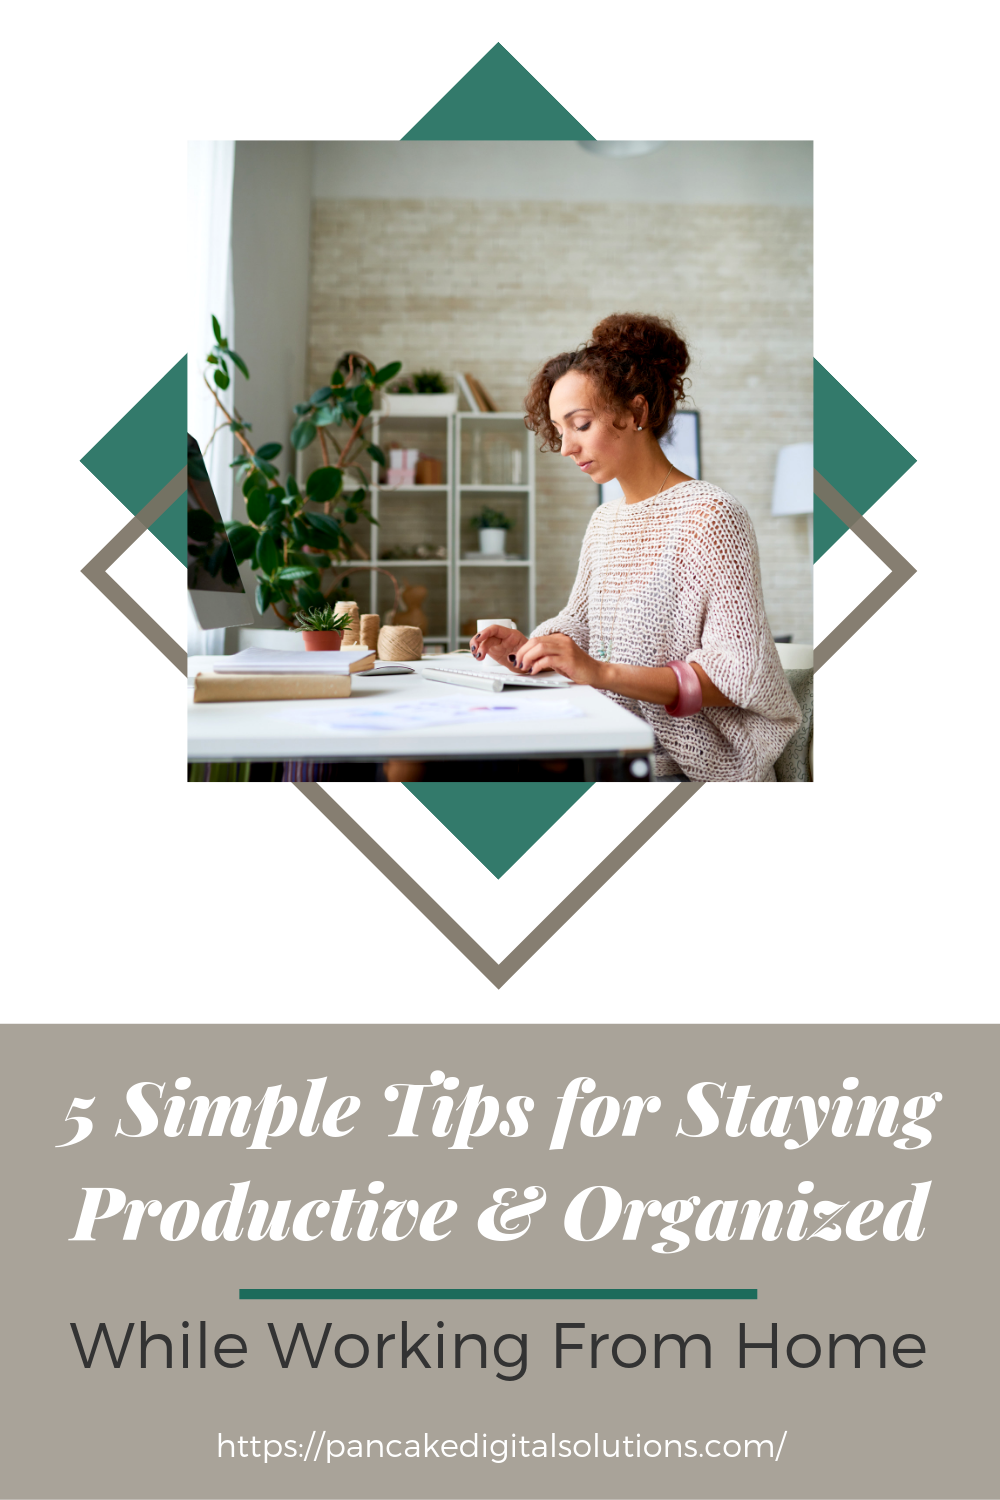 5 Simple Tips for Staying Productive & Organized While Working From Home